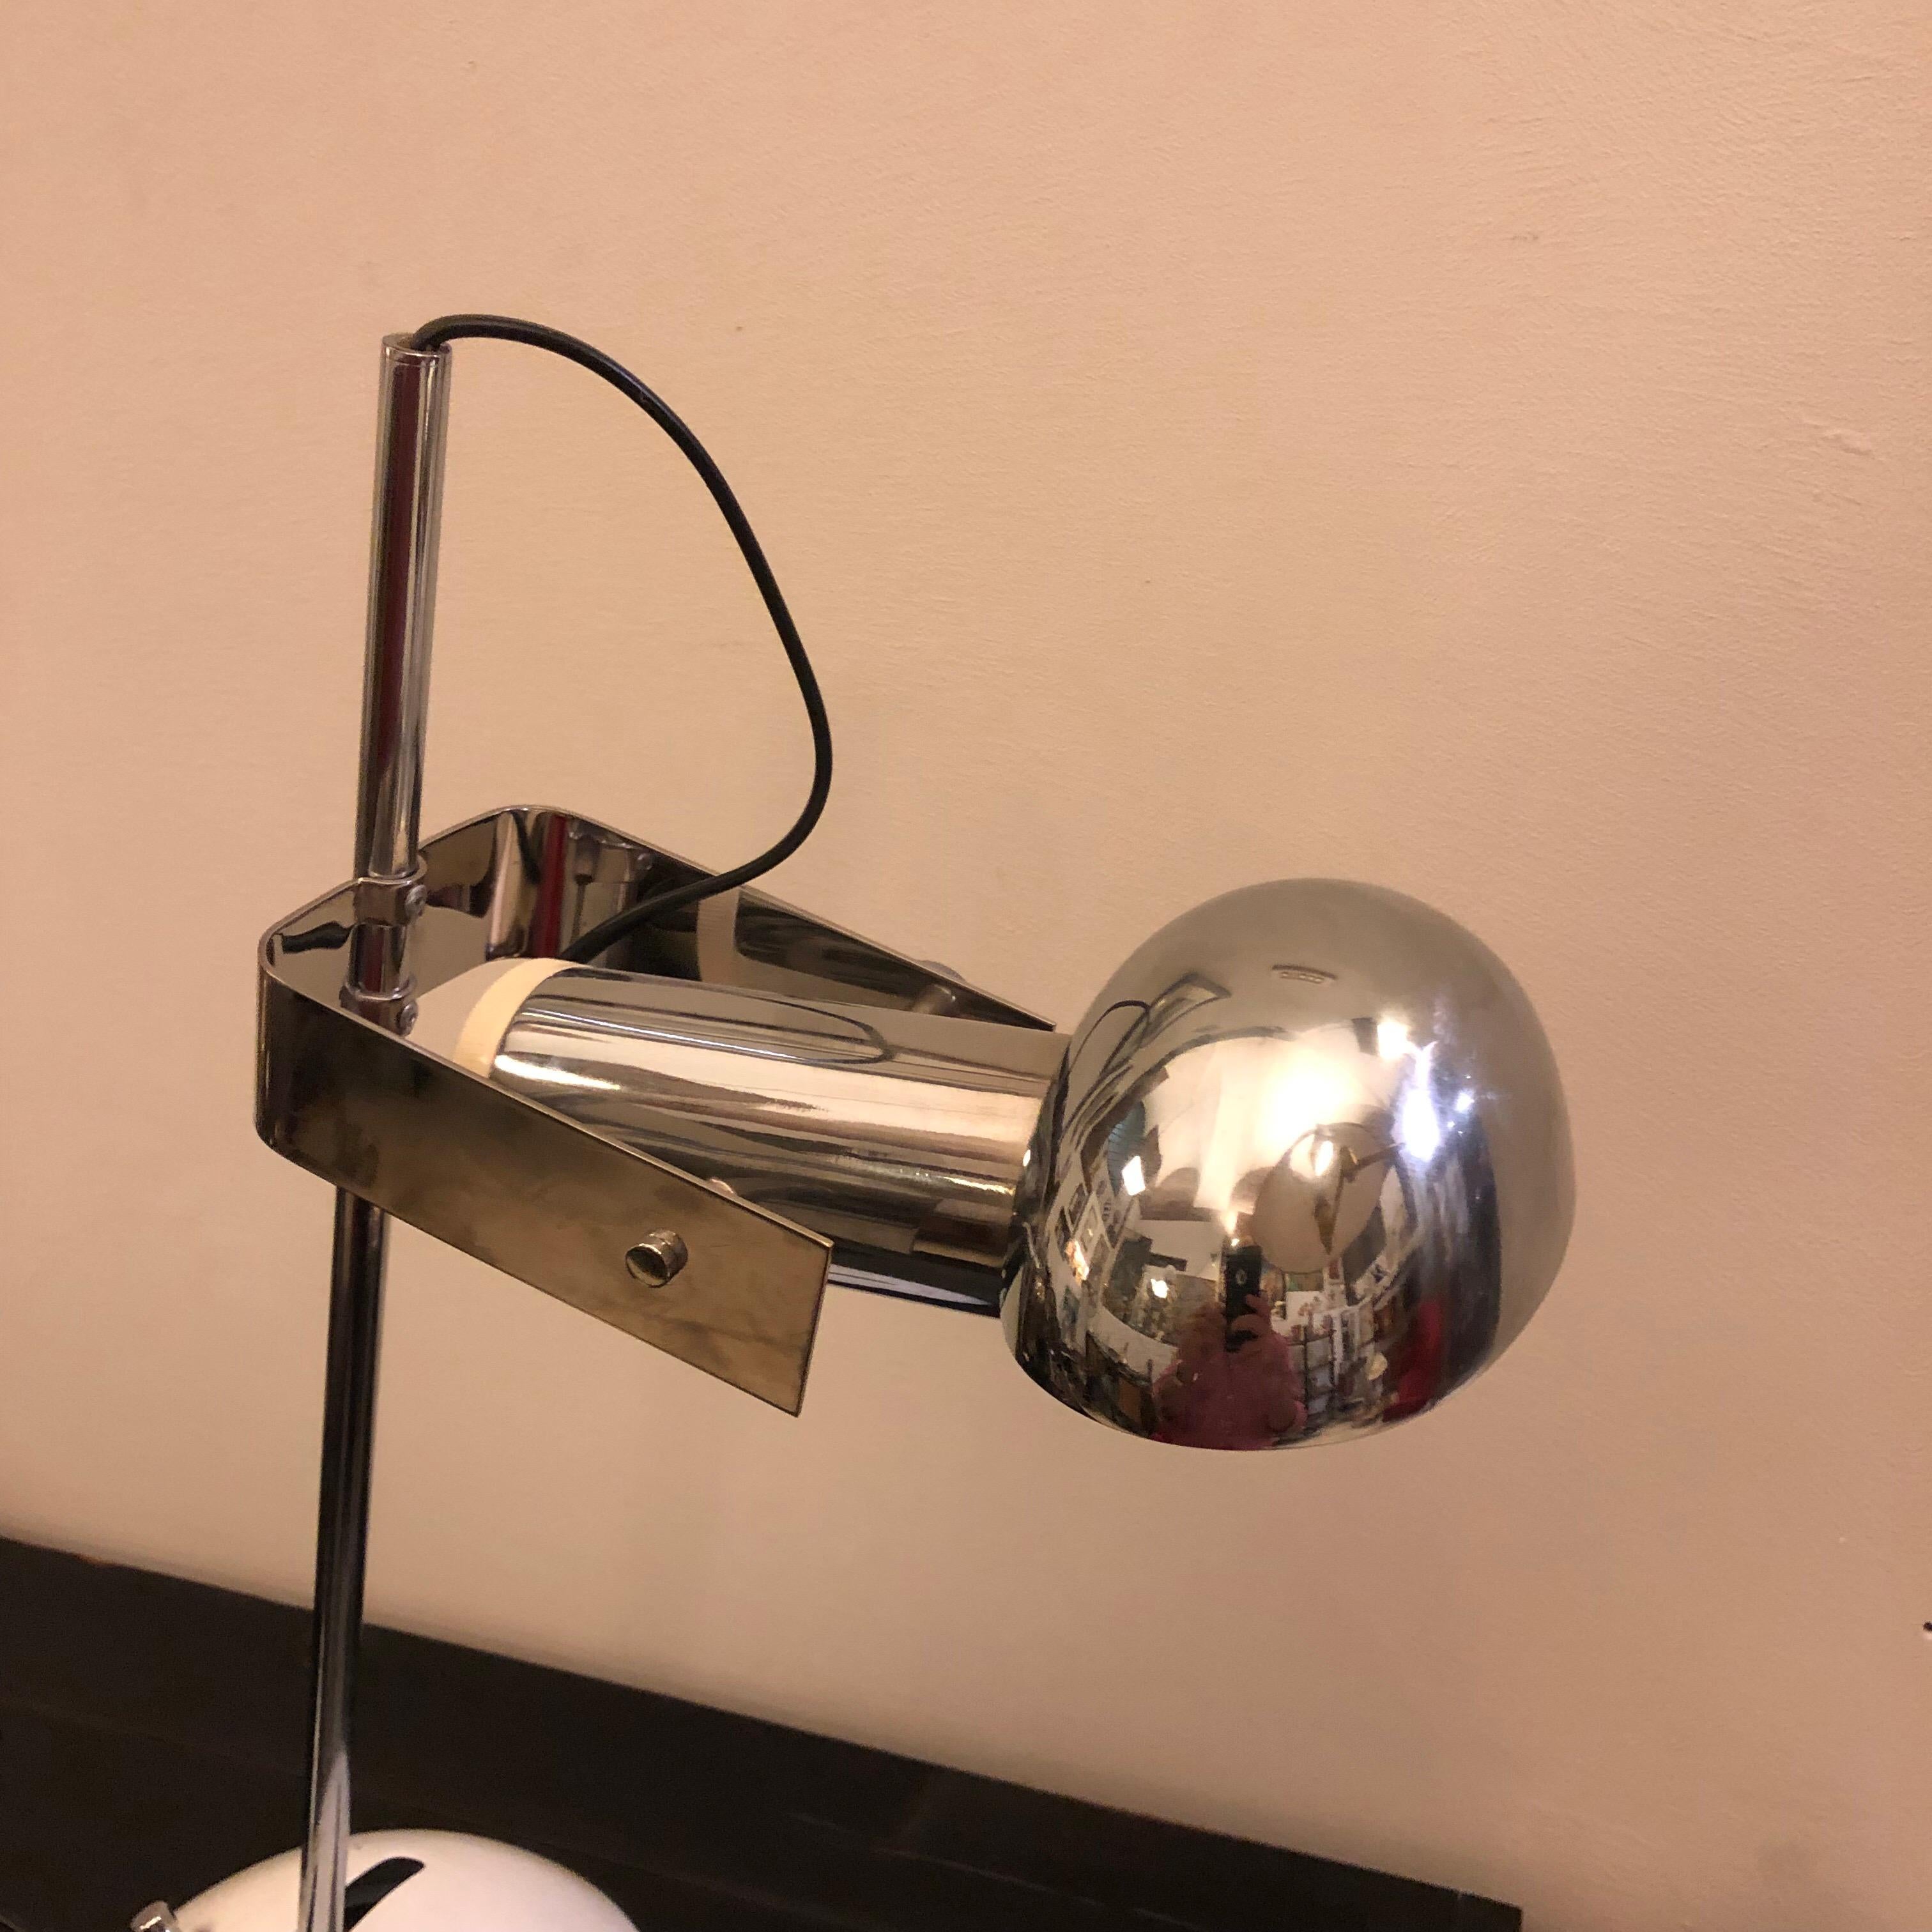 Labeled T395 Luci Milano table lamp designed by Robert Sonneman, good conditions everywhere but the lamp is original of the period and thus shows normal signs of age and use.